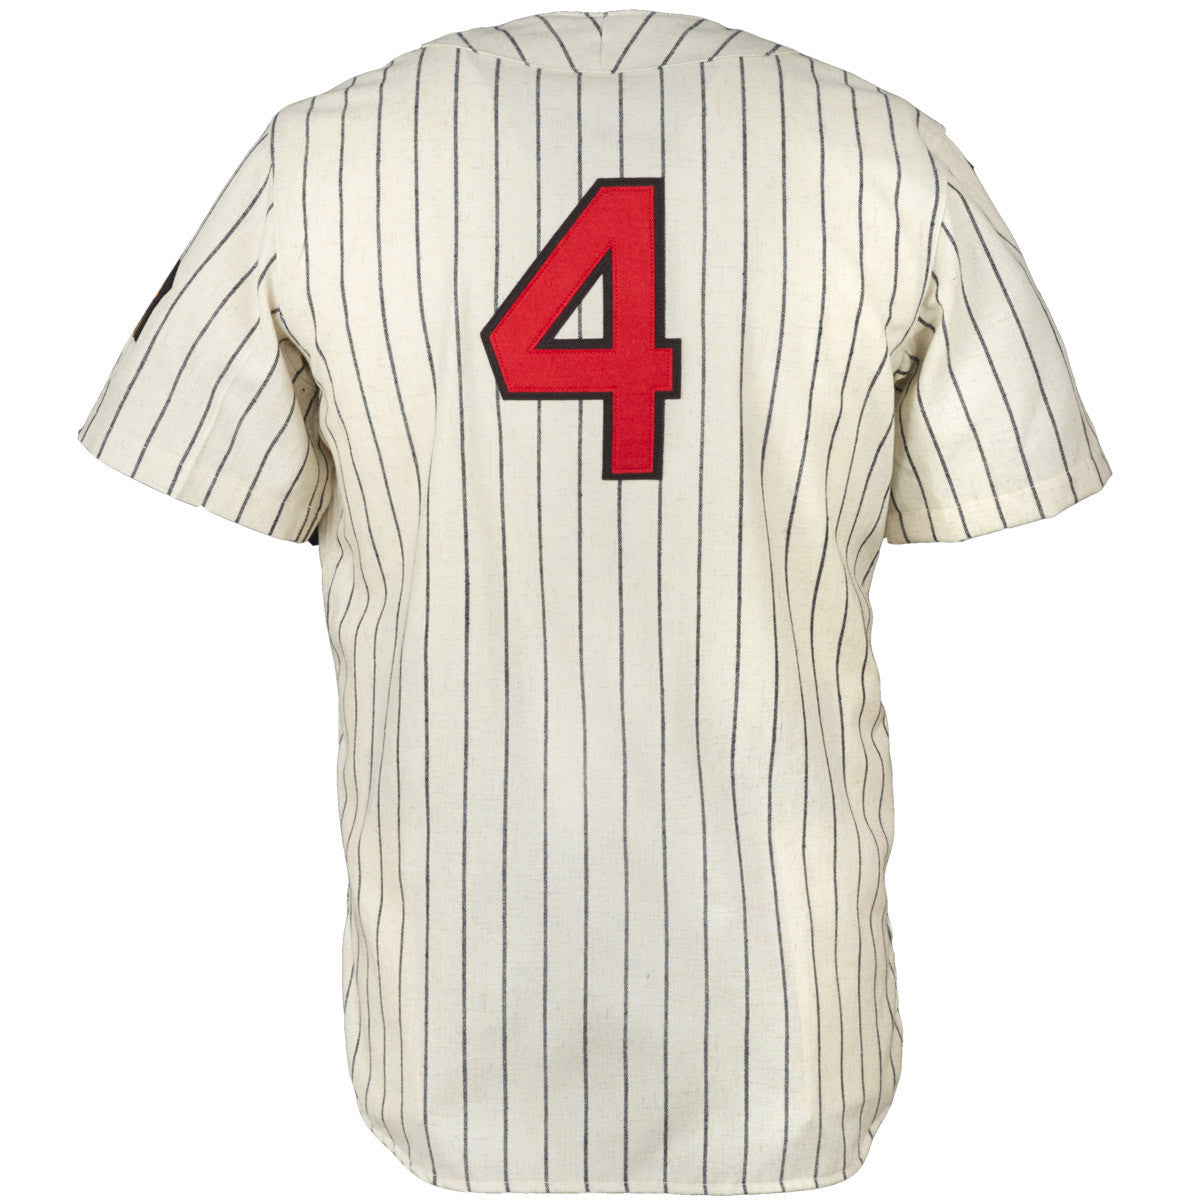 Ponce Leones 1942 Home Jersey